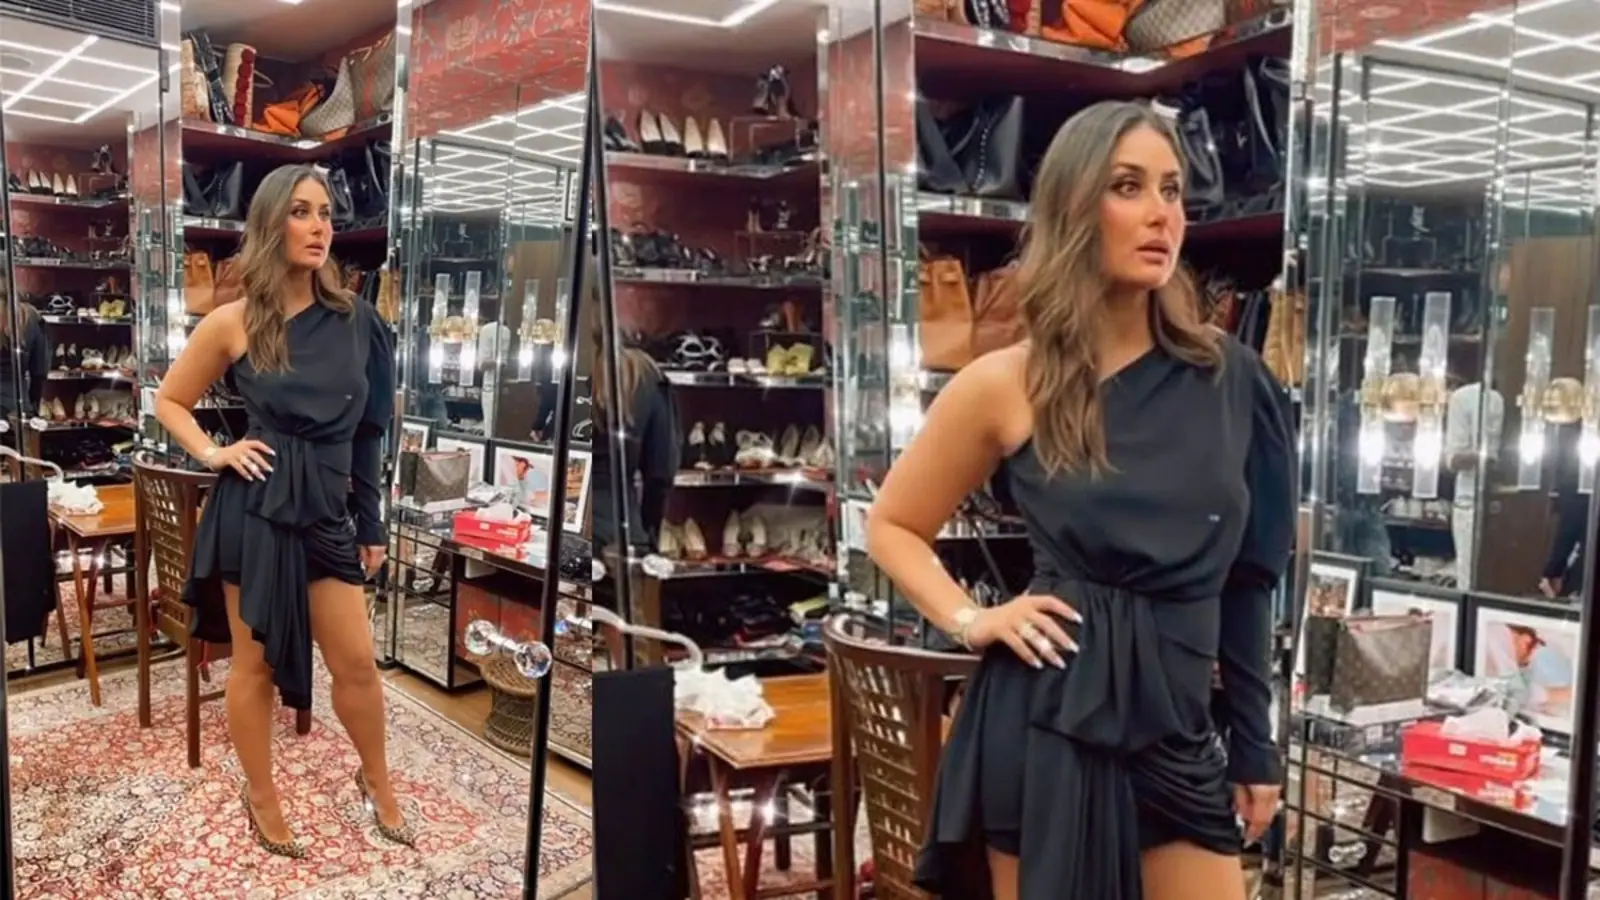 Step inside Kareena Kapoor’s walk-in closet, check out her shoe and bag collection. Watch